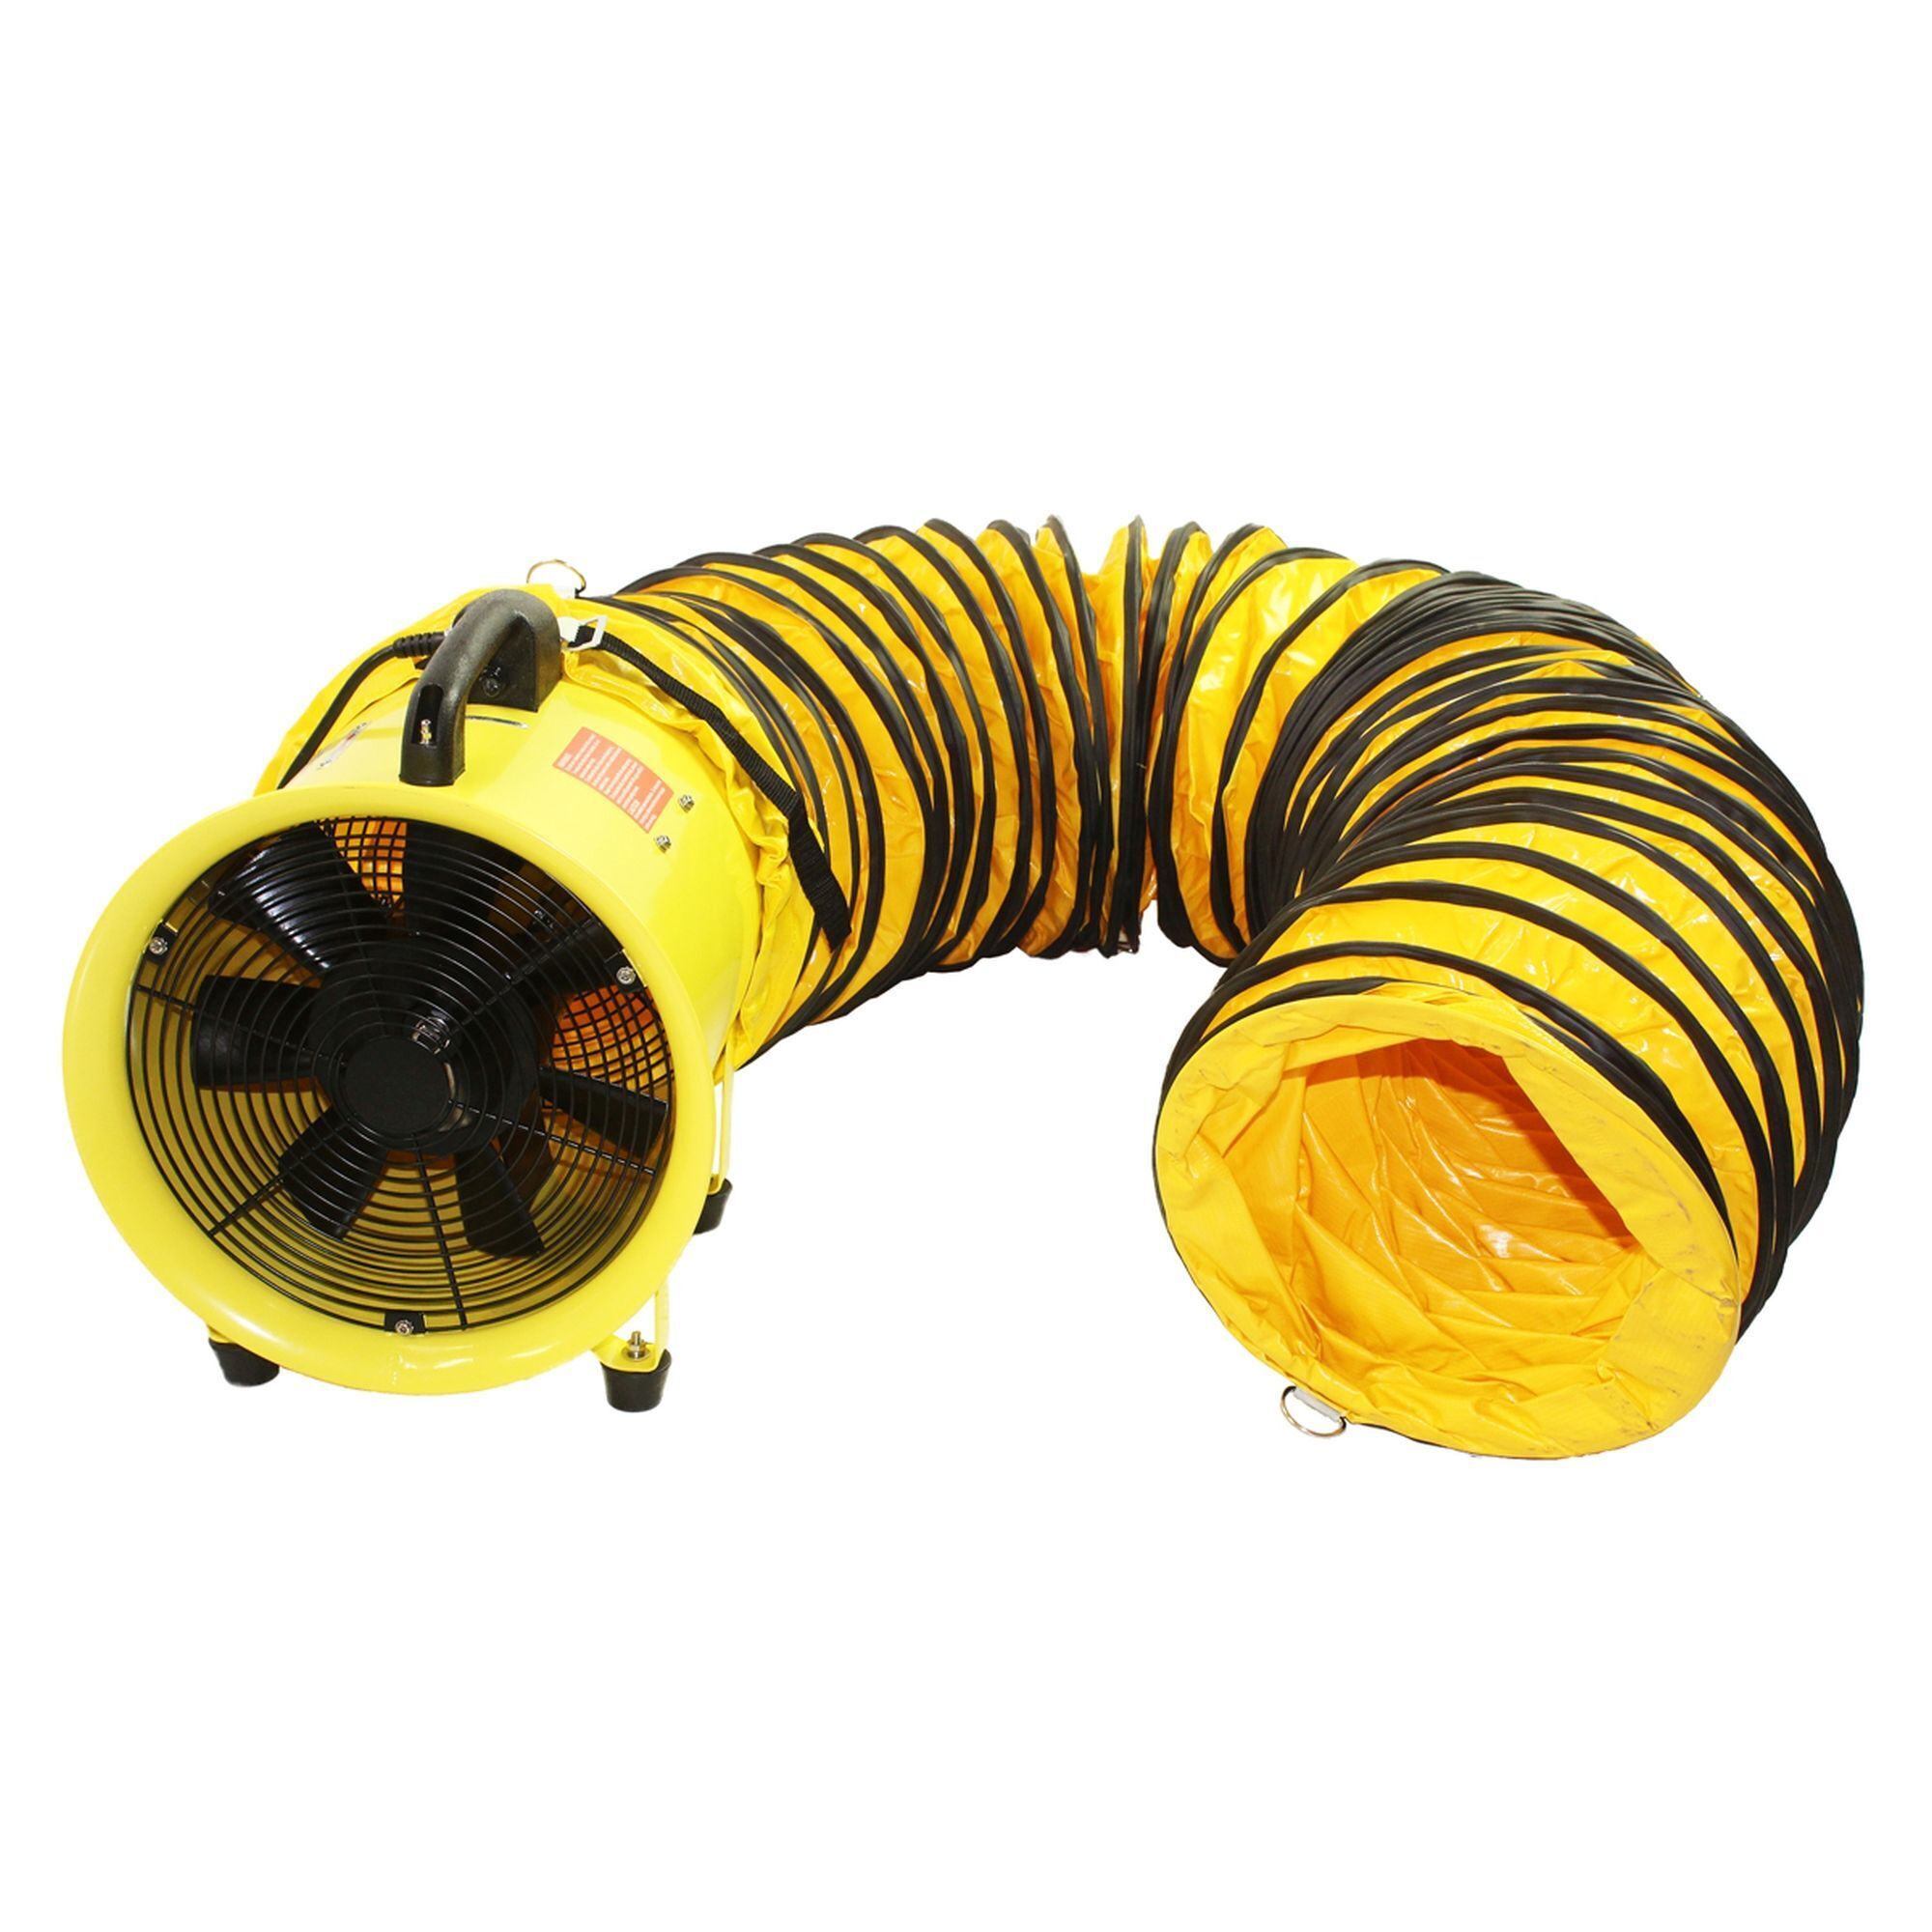 Maxx Air, 12Inch Axial Confined Space Ventilator with Hose, Fan Type Confined Space Fans, Air Delivery 2000 cfm, Model HVHF 12COMBOUPS